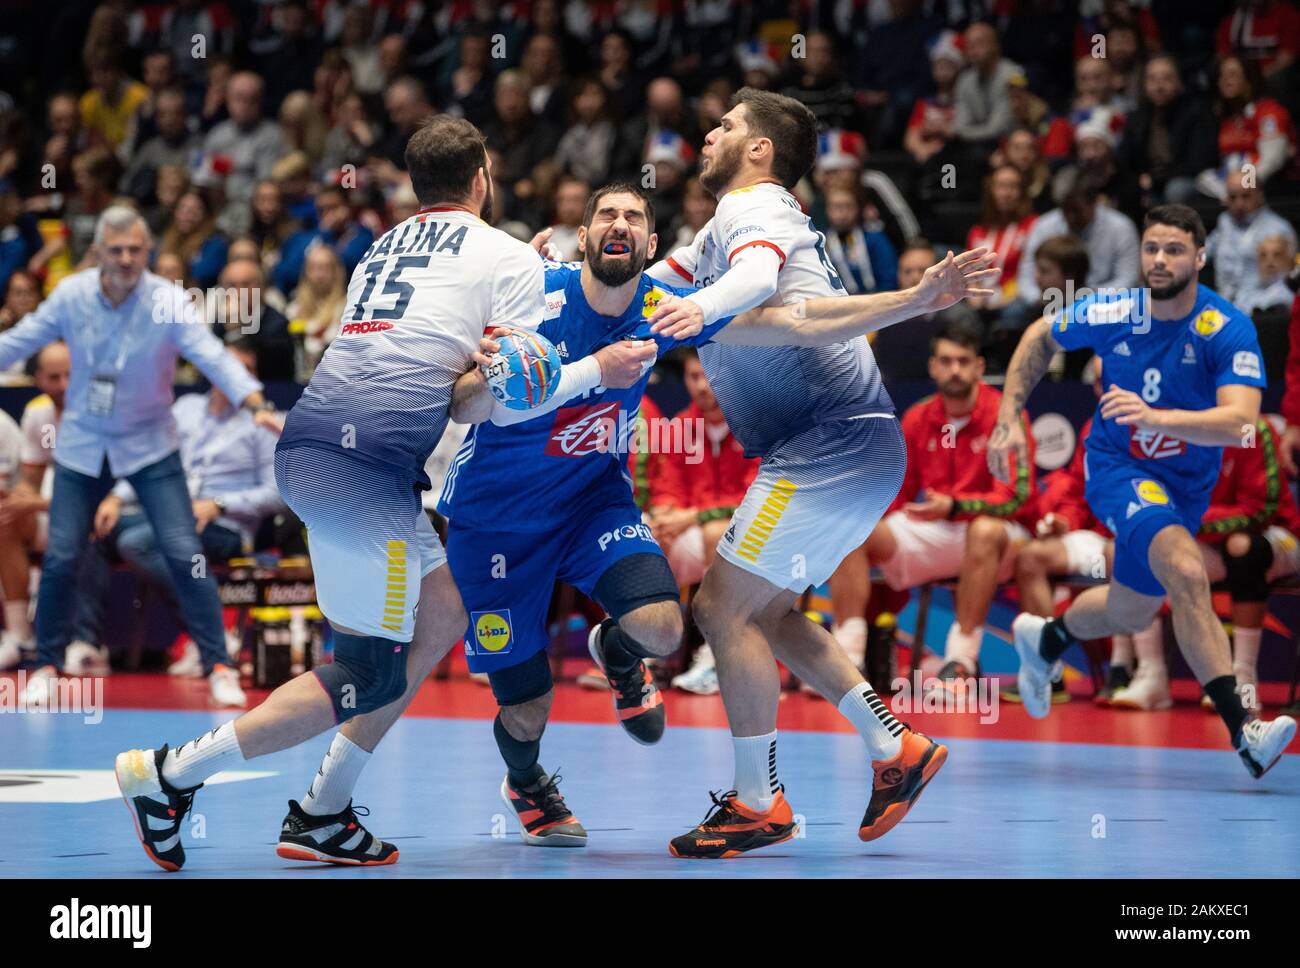 10 January 2020 Norway Trondheim Handball European Championship France Portugal Preliminary Round Group D Matchday 1 Nikola Karabatic M Of France Against Daymaro Salina L And Fabio Magalhaes 3rd From Left